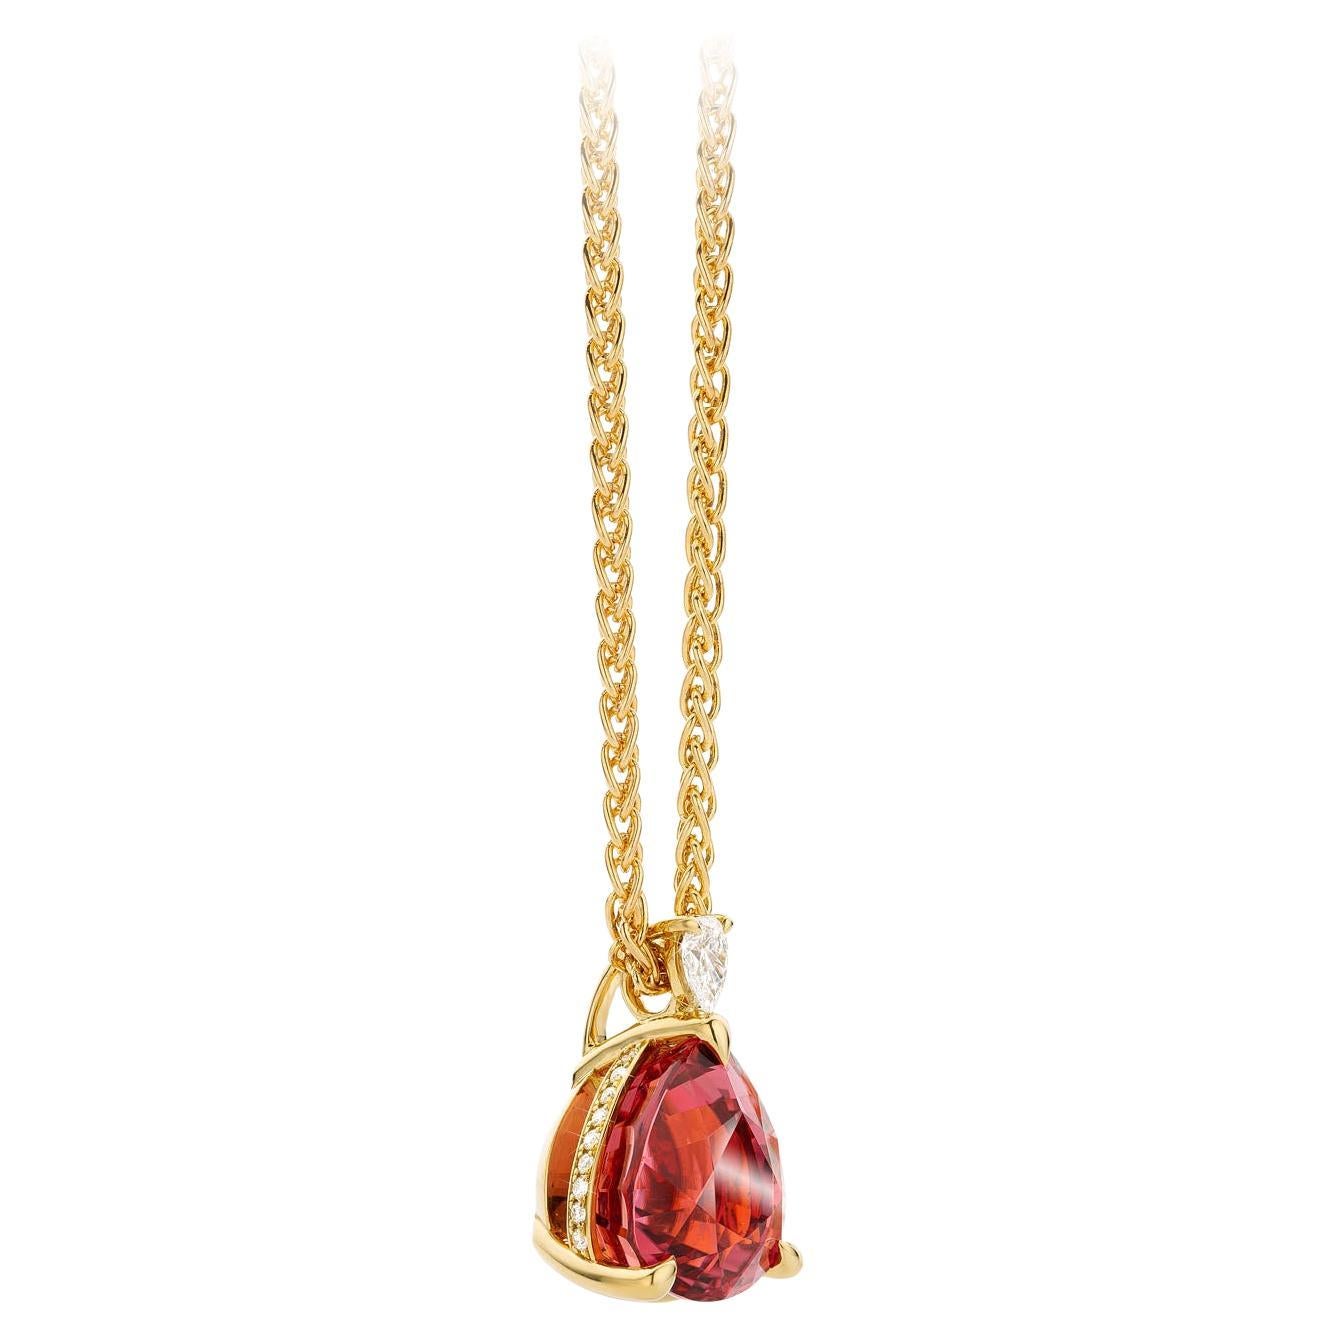 Cober "Gentle pink" with a 14 ct. Tourmaline and Diamonds Yellow Gold Pendant  For Sale